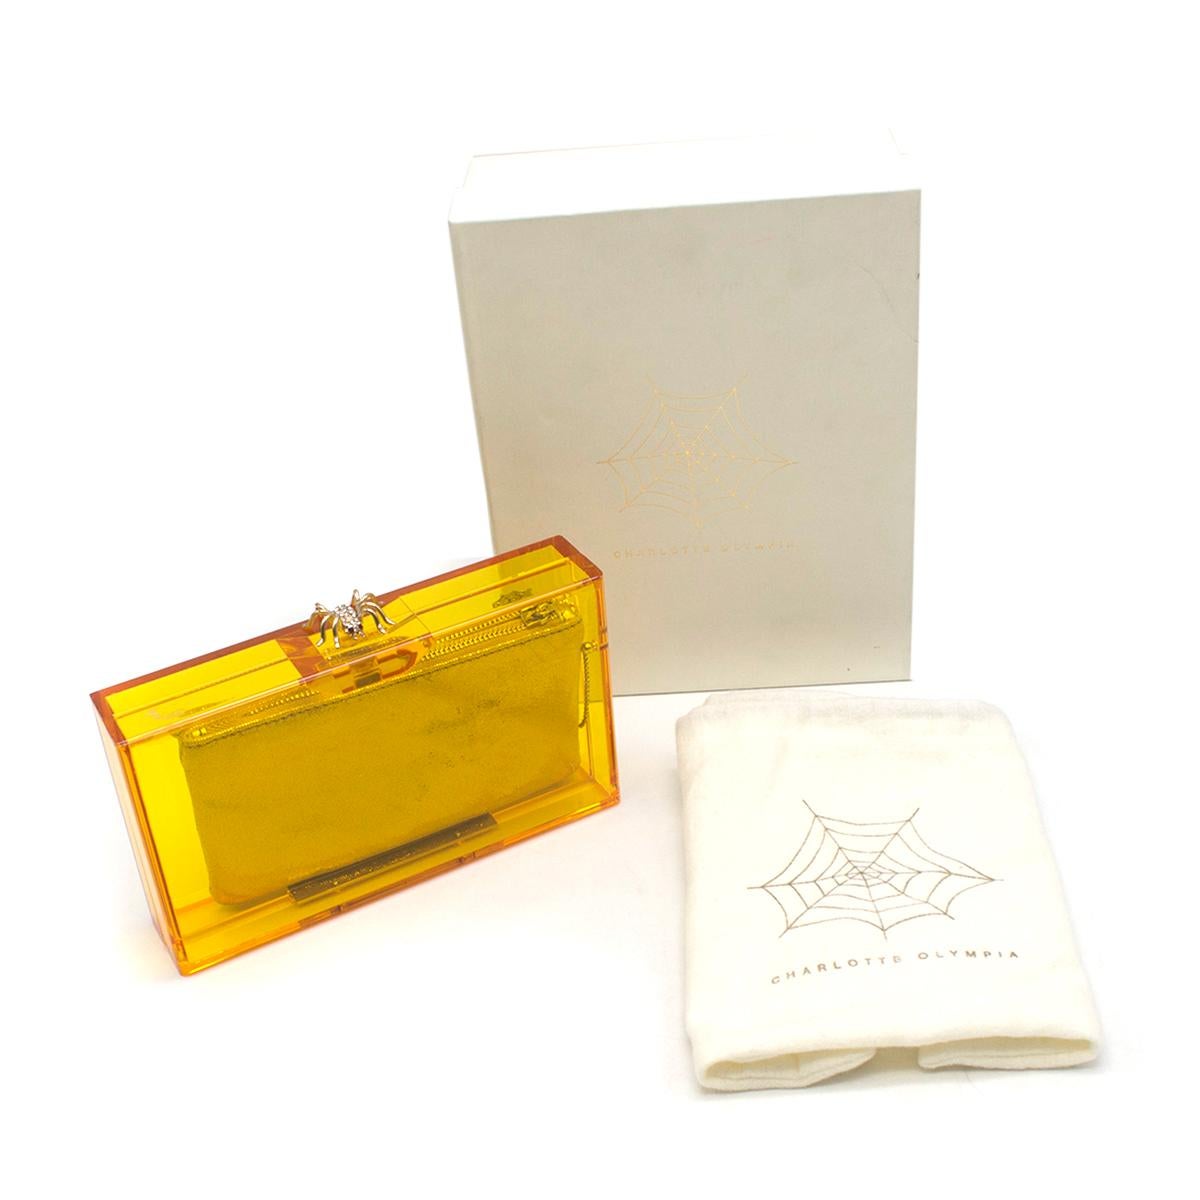 Charlotte Olympia Pandora Perspex Clutch For Sale 4